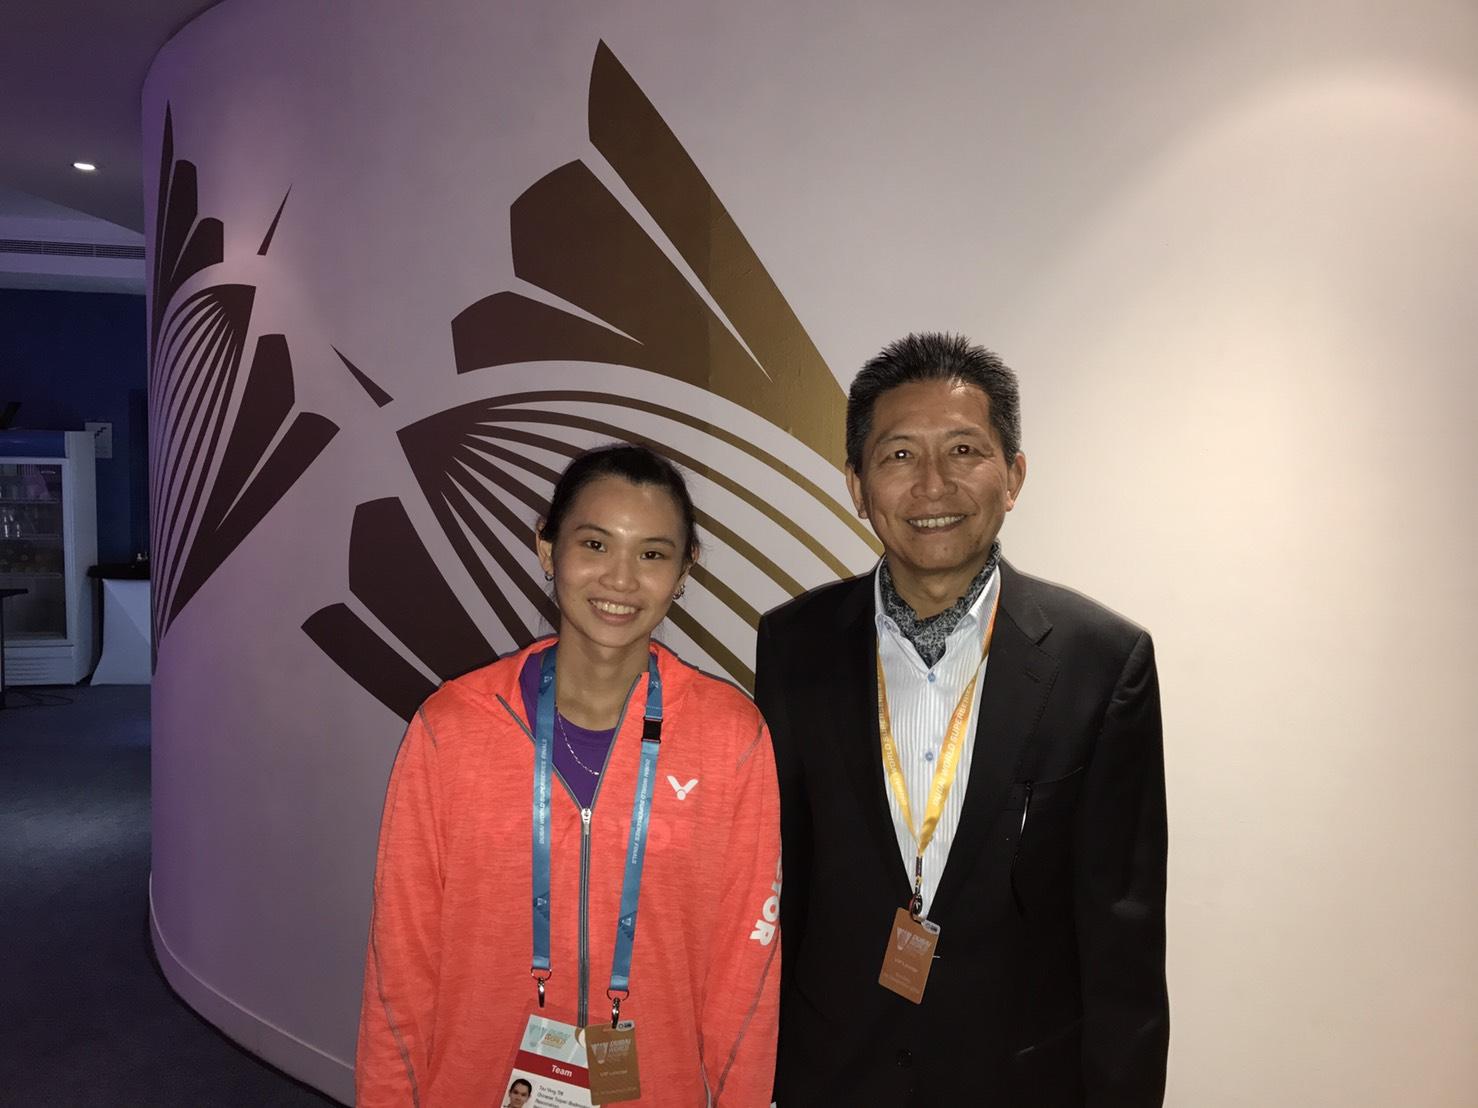 Director General Yang congratulates World’s No.1 Ms. Tai on winning the championship of badminton Women Single Final game of Dubai World Superseries Finals on December 18, 2016.